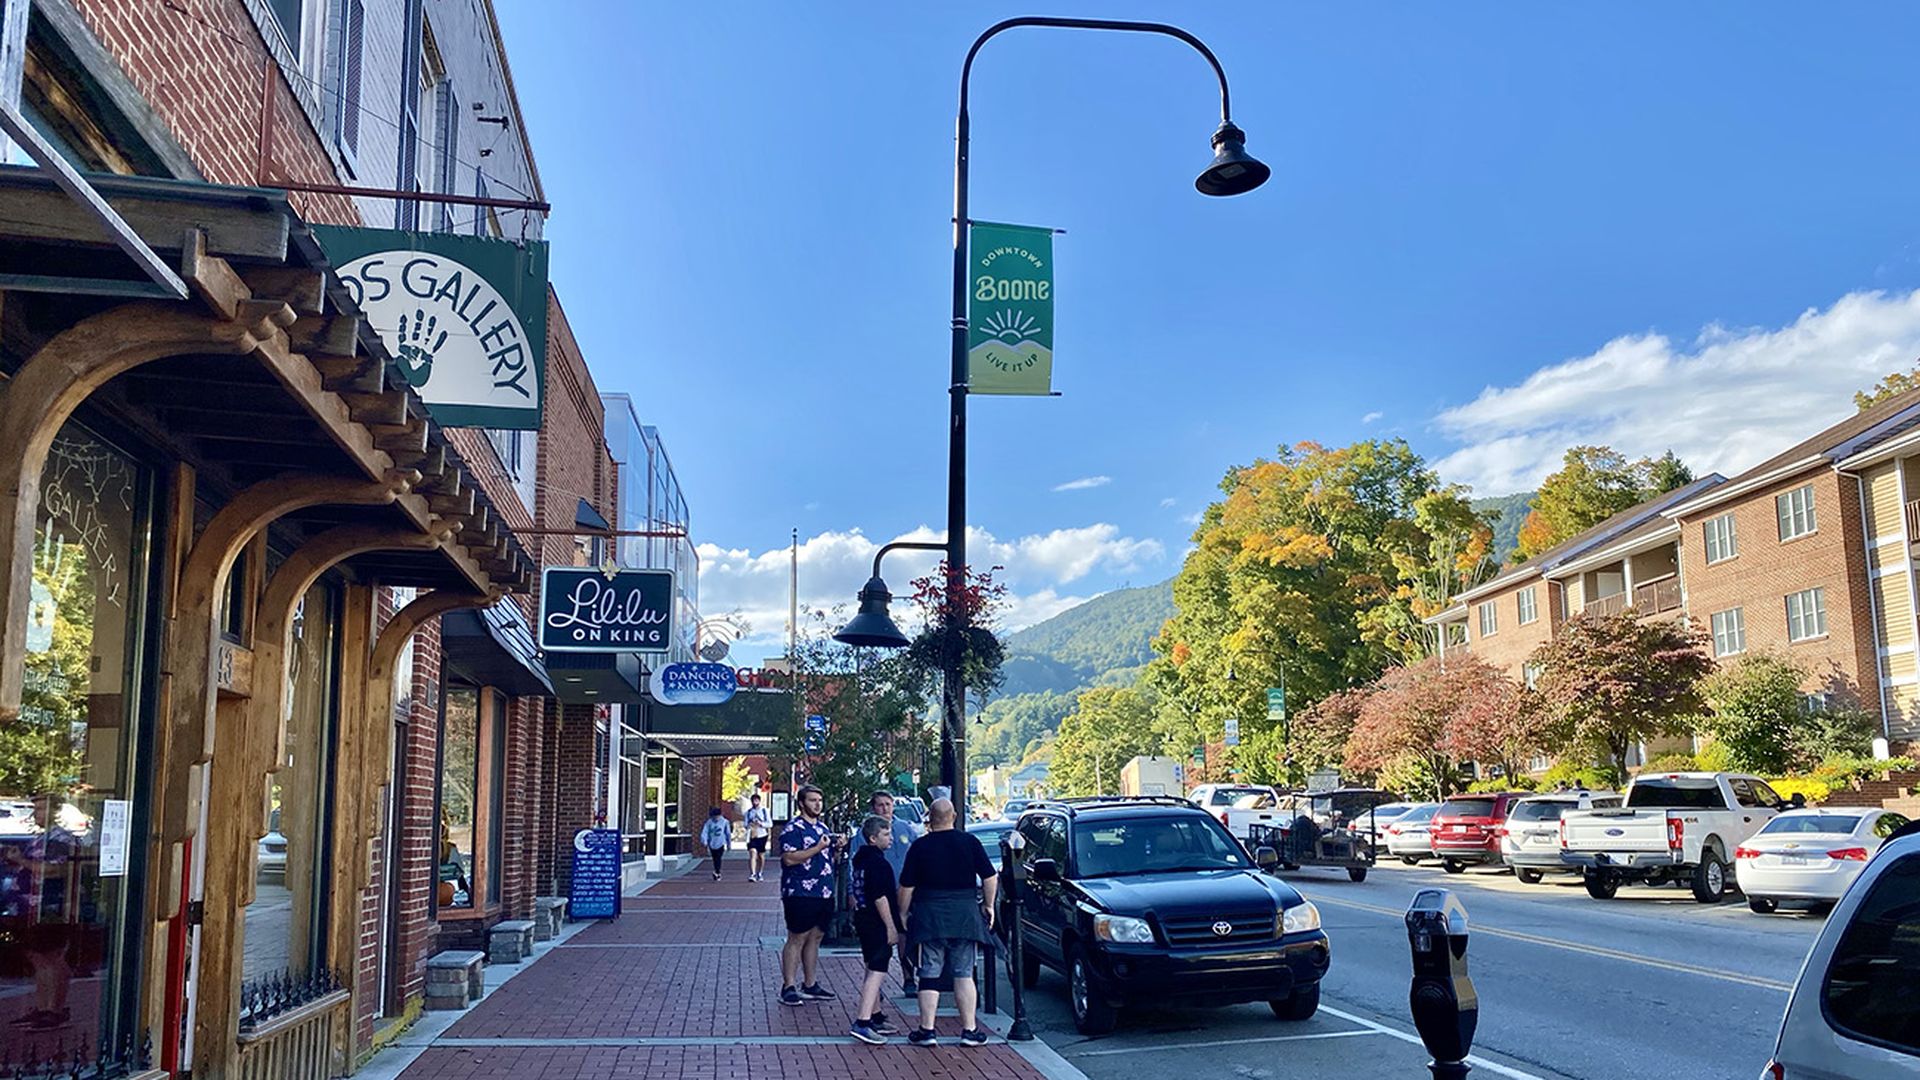 Boone is one of North Carolina's most-visited mountain town, home to App State. Photo: Emma Way/Axios